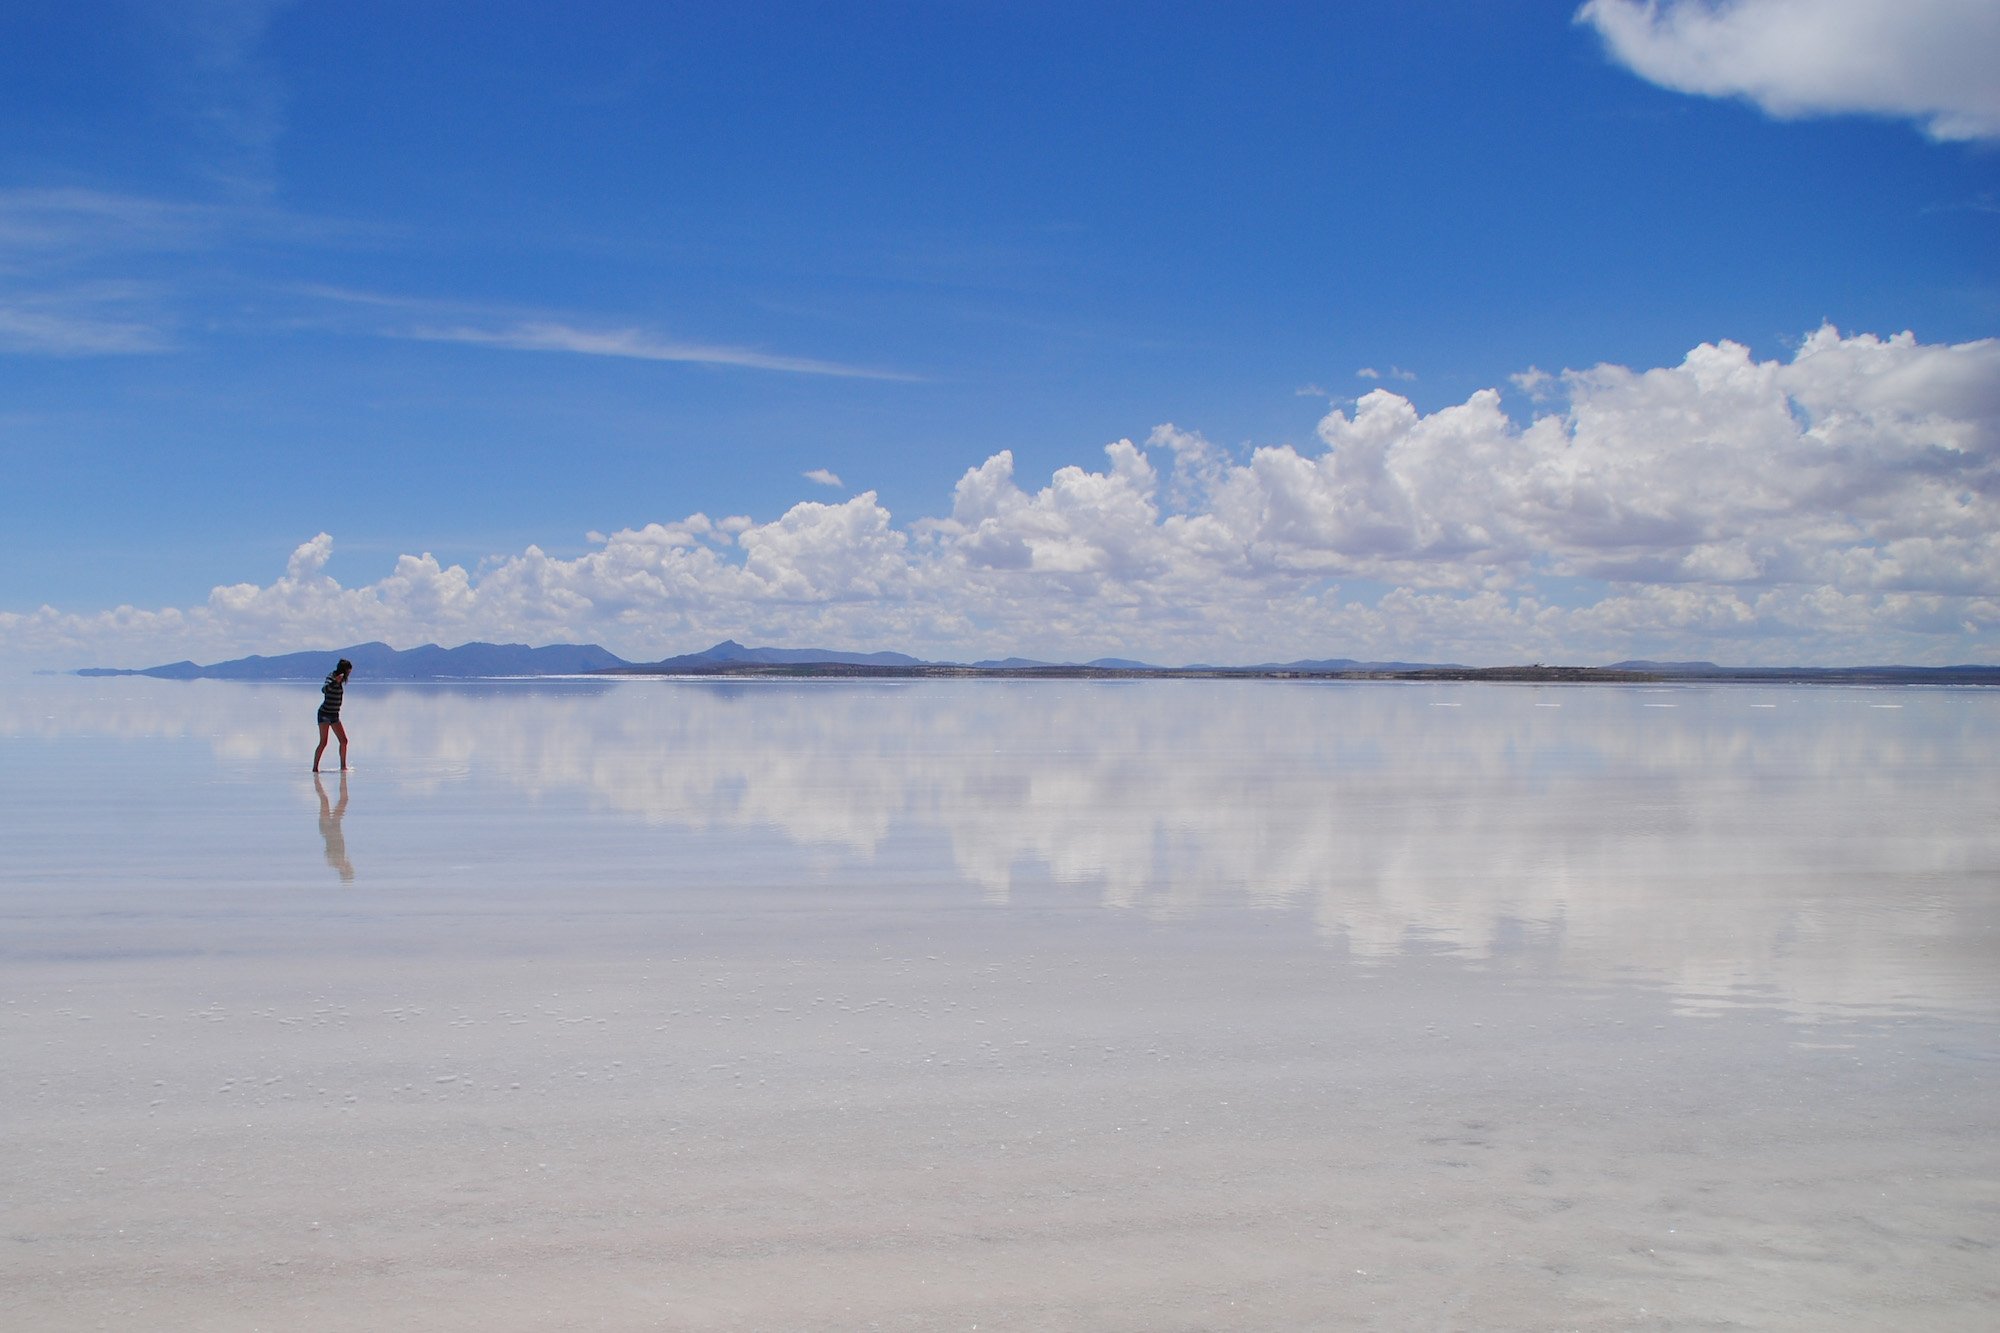 bolivia-s-salt-flats-are-the-closest-you-ll-get-to-heaven-on-earth